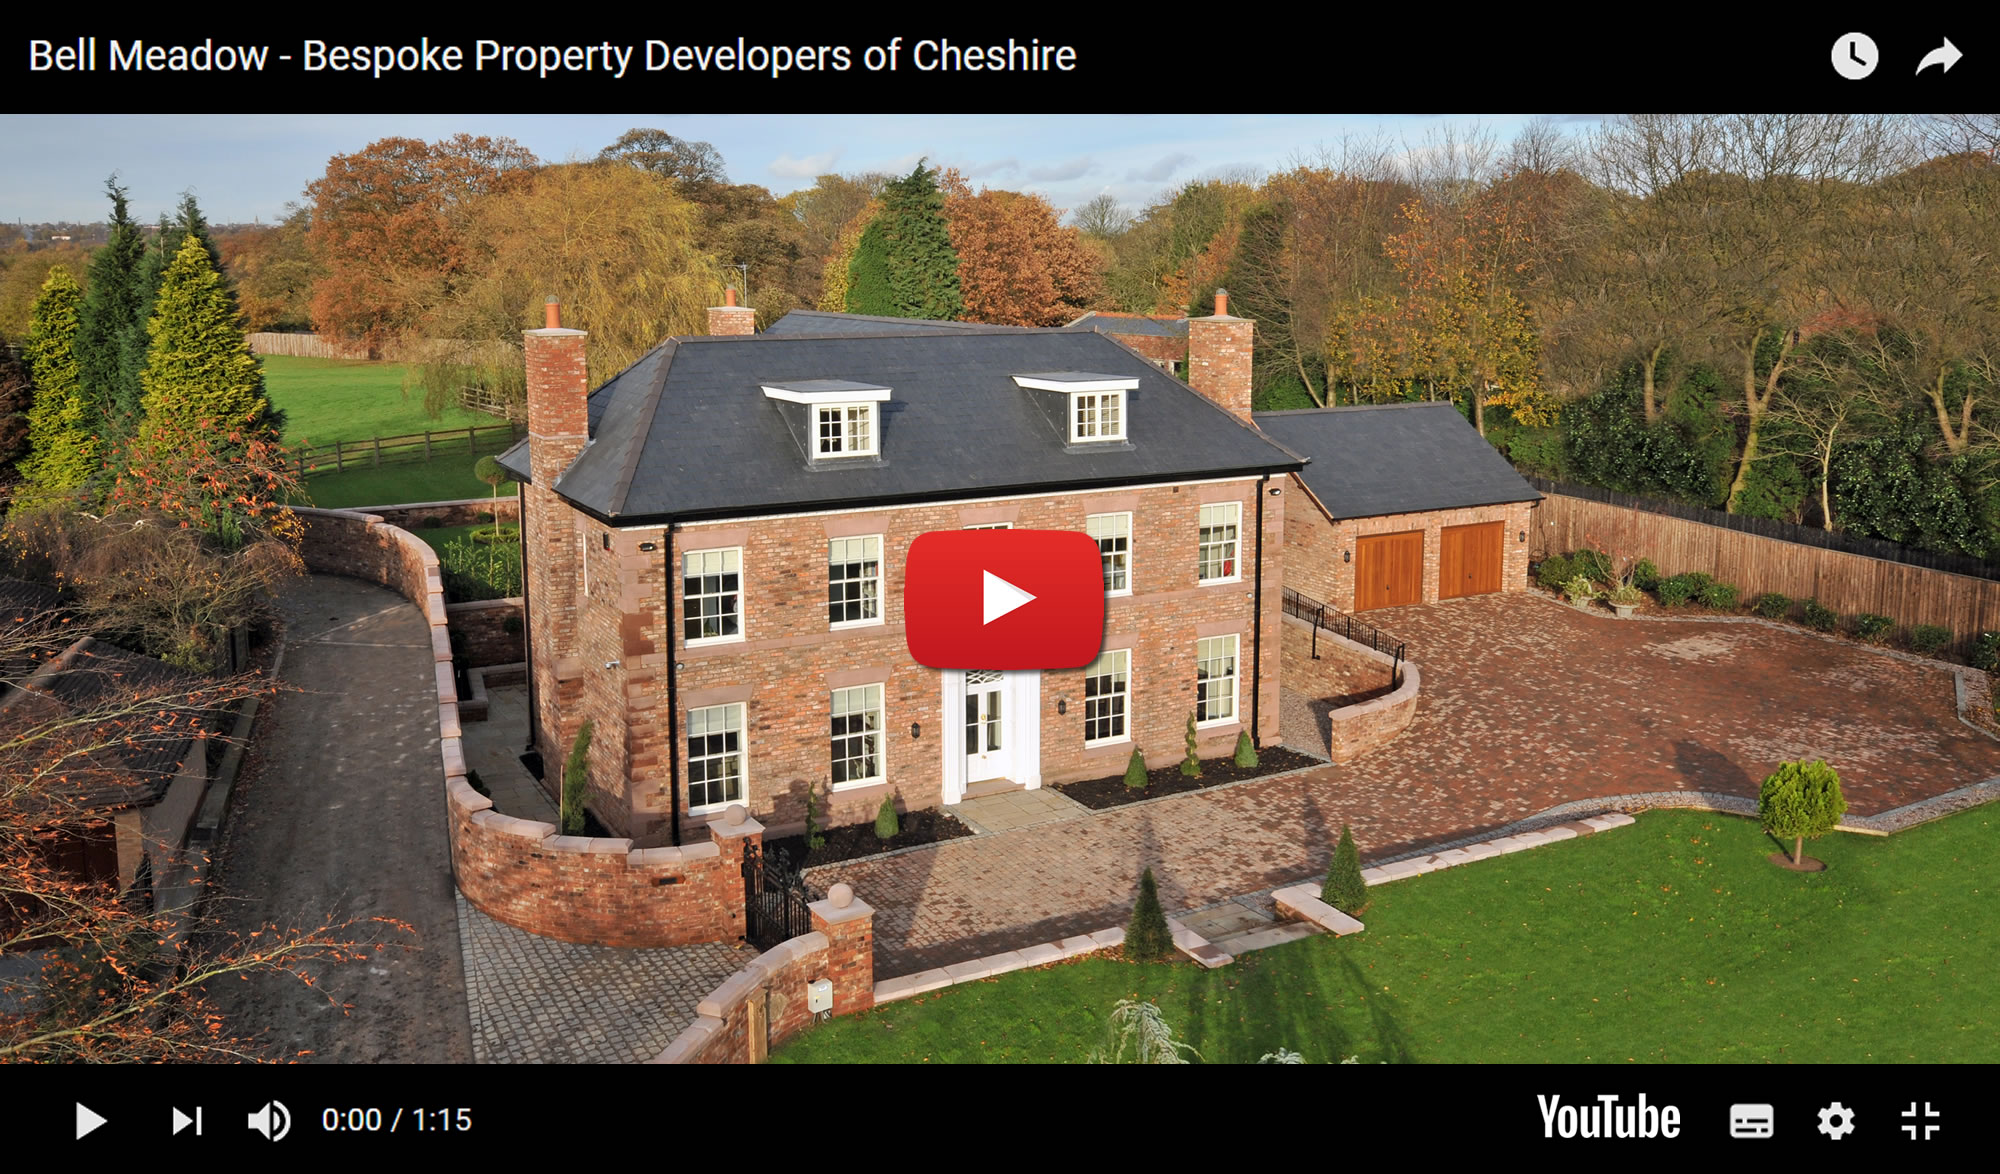 Bell Meadow - Bespoke Property Developers of Cheshire